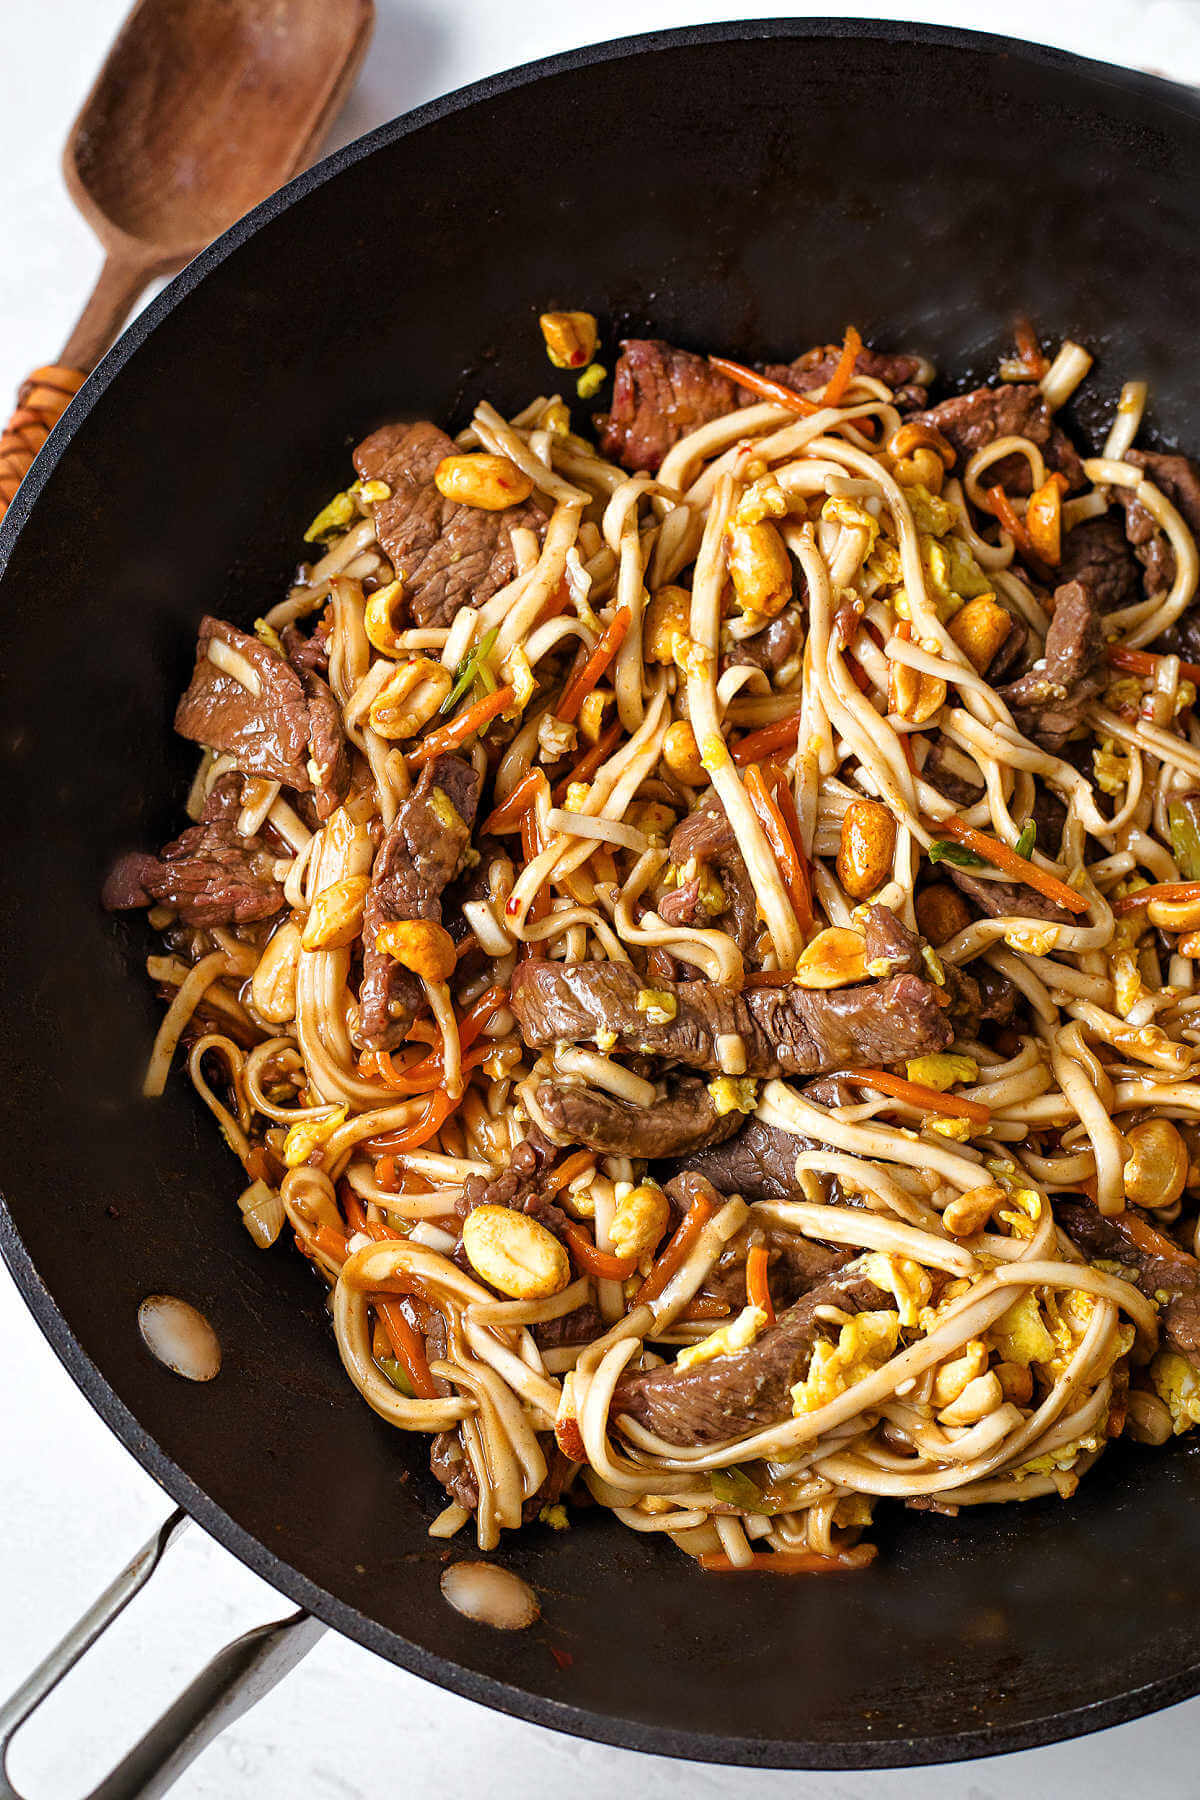 Beef pad thai in a wok on a table.